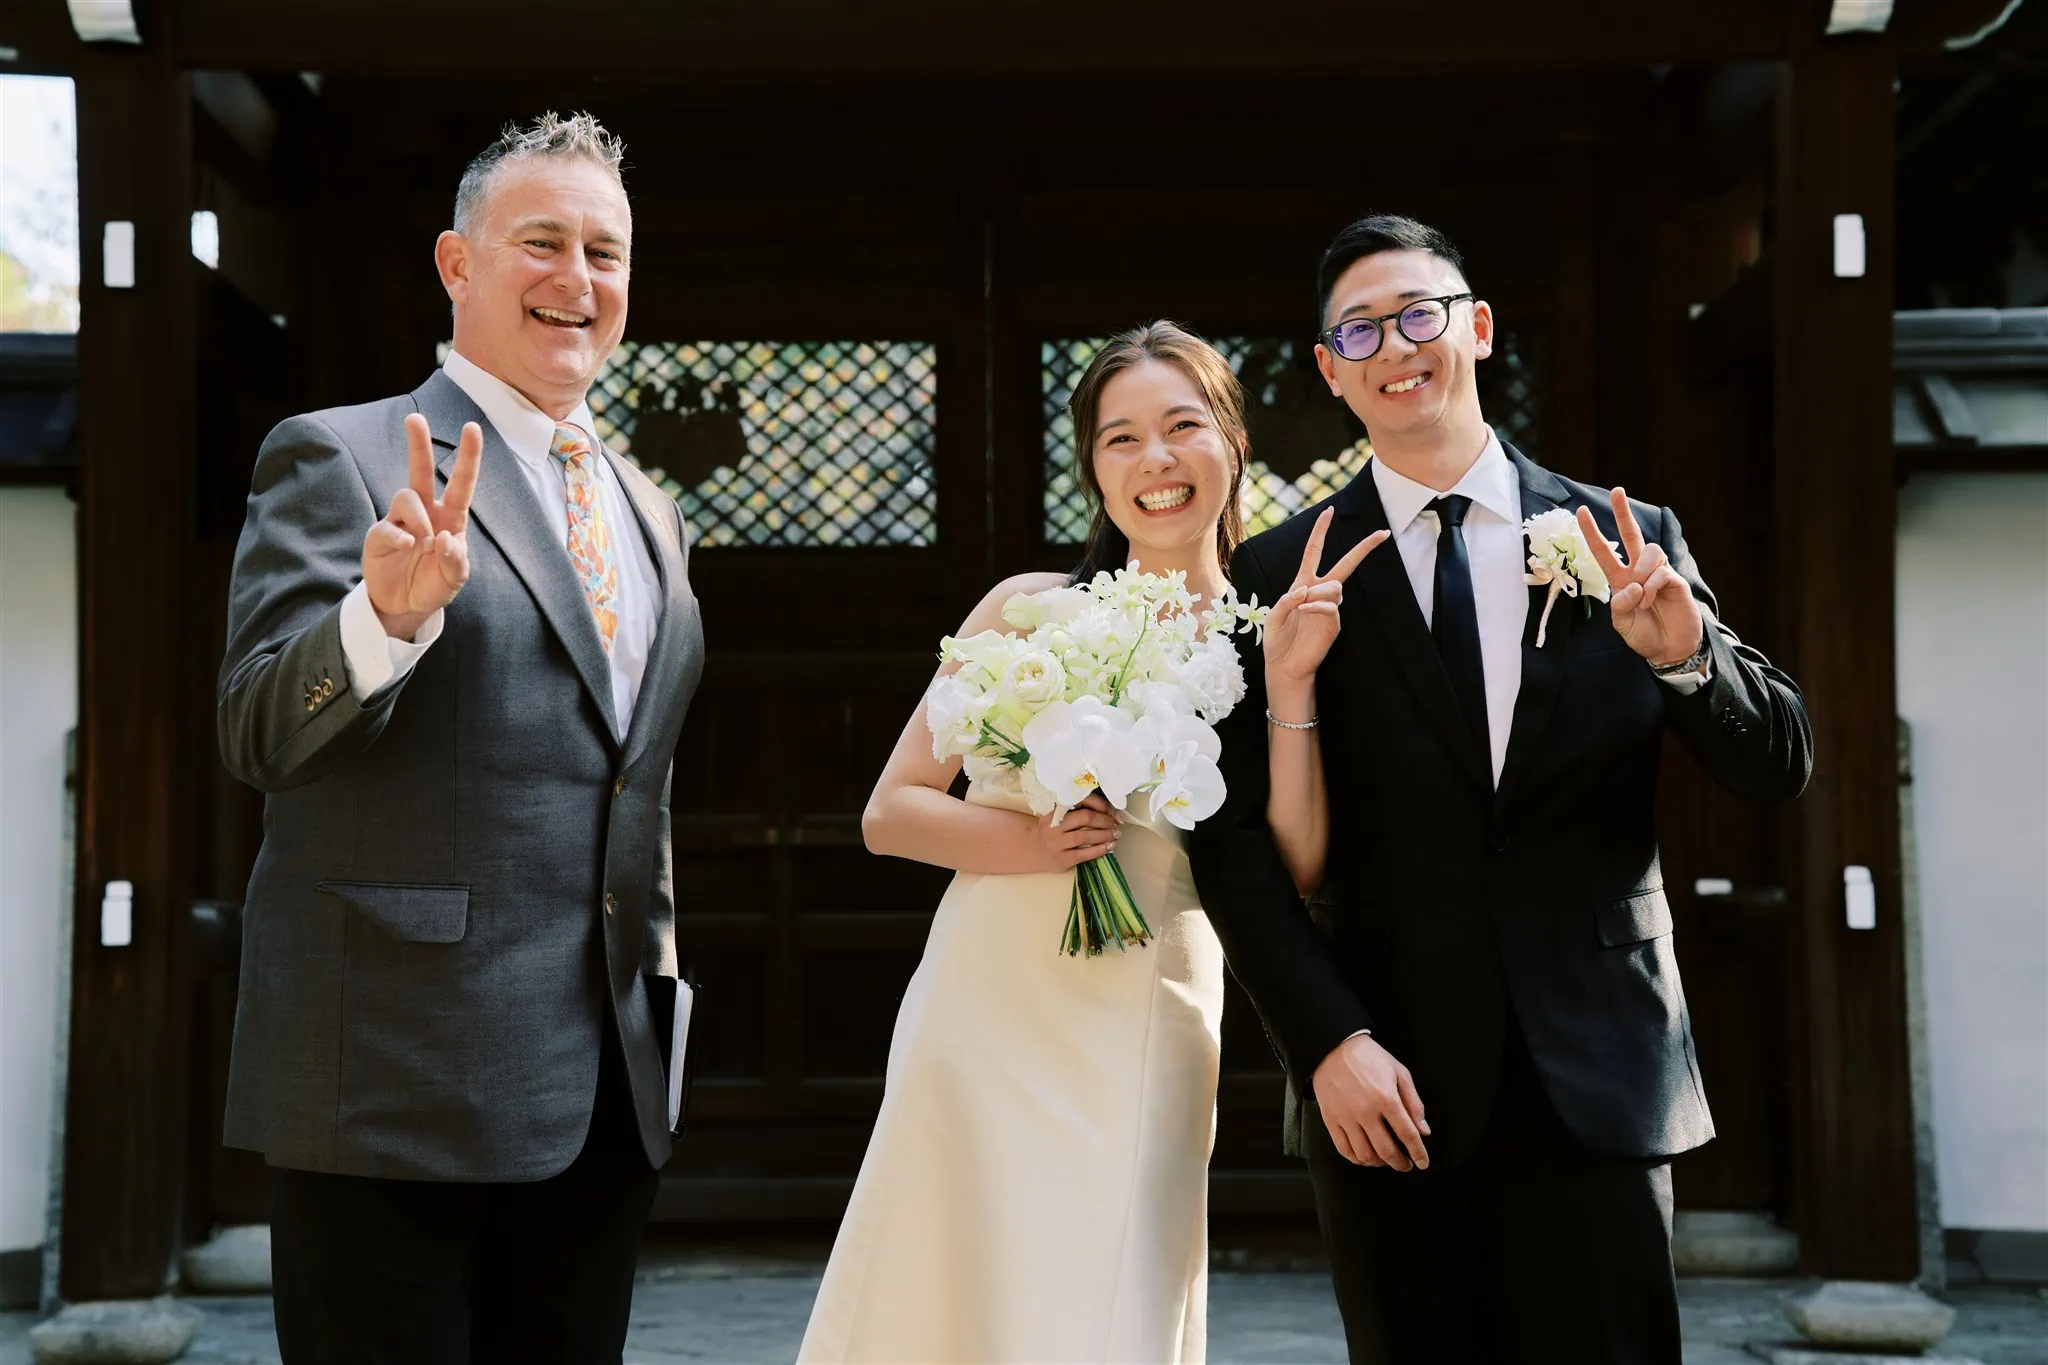 Kyoto Tokyo Japan Elopement Wedding Photographer, Planner & Videographer | A bride and groom elope to Japan, where they pose for a photo in front of a temple.